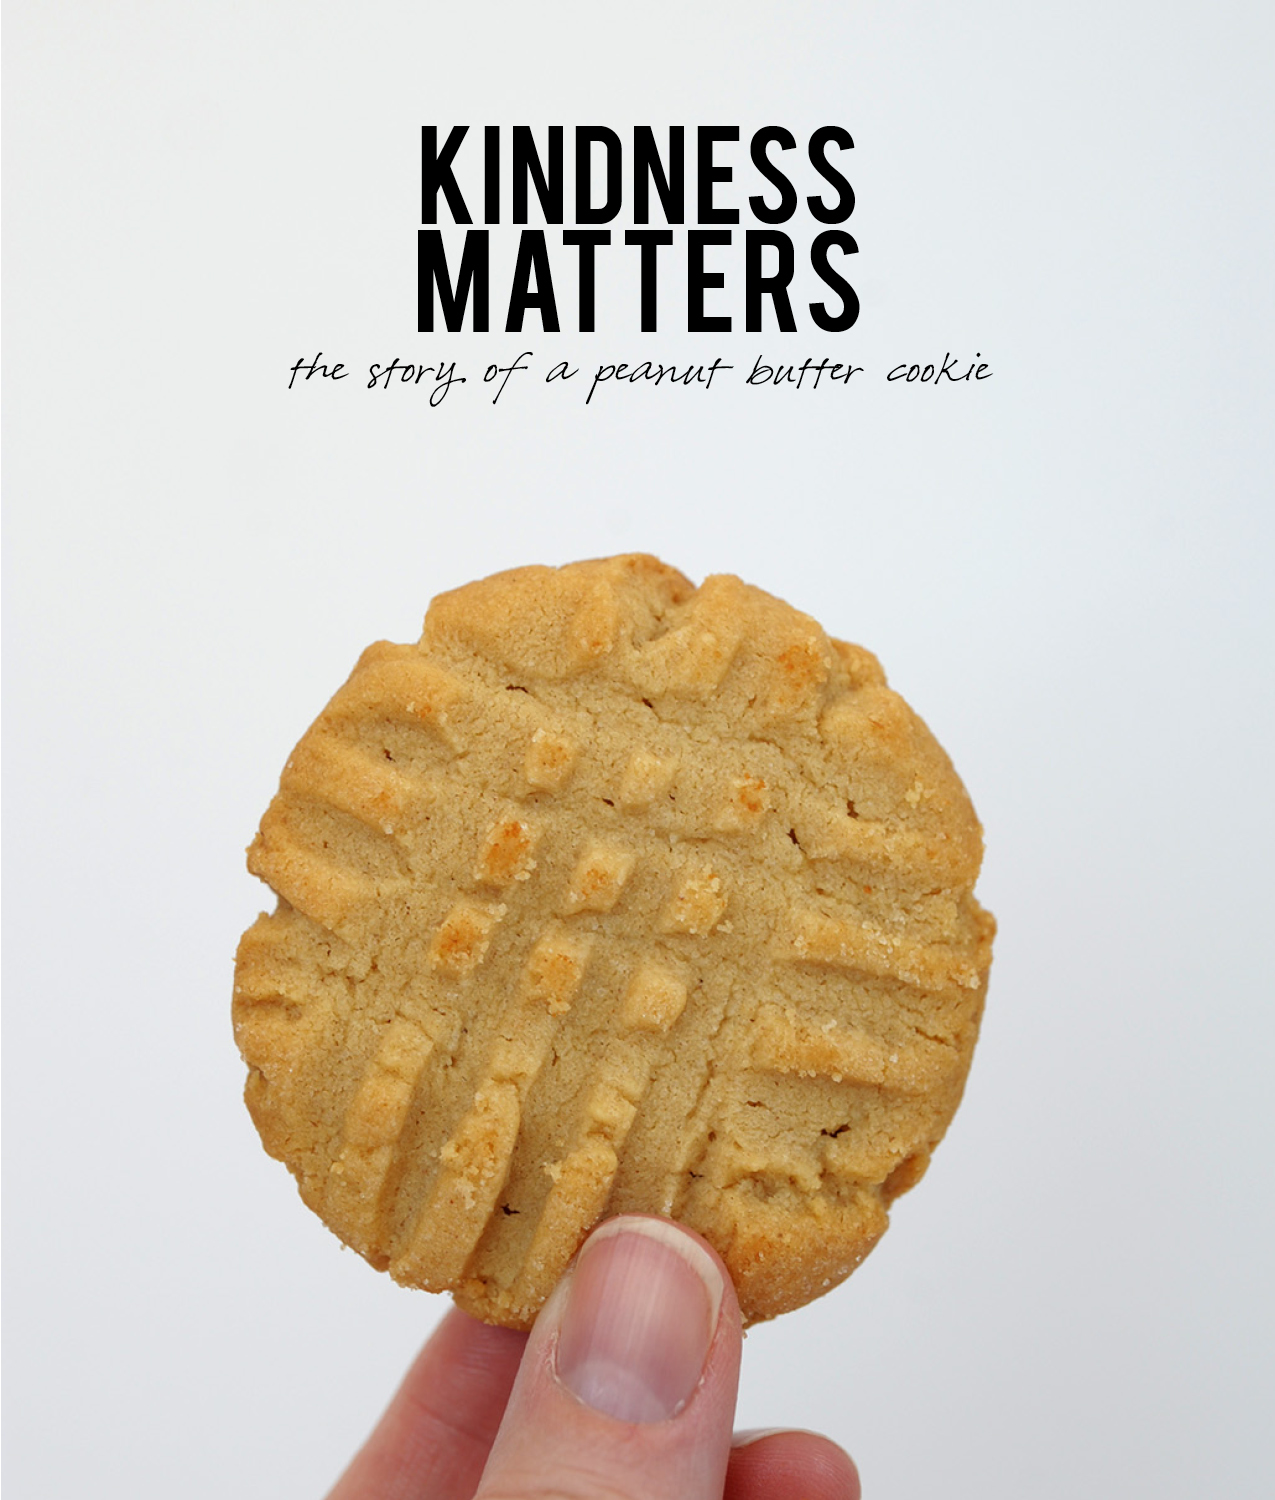 Kindness Matters, the story of a peanut butter cookie on aliceandlois.com